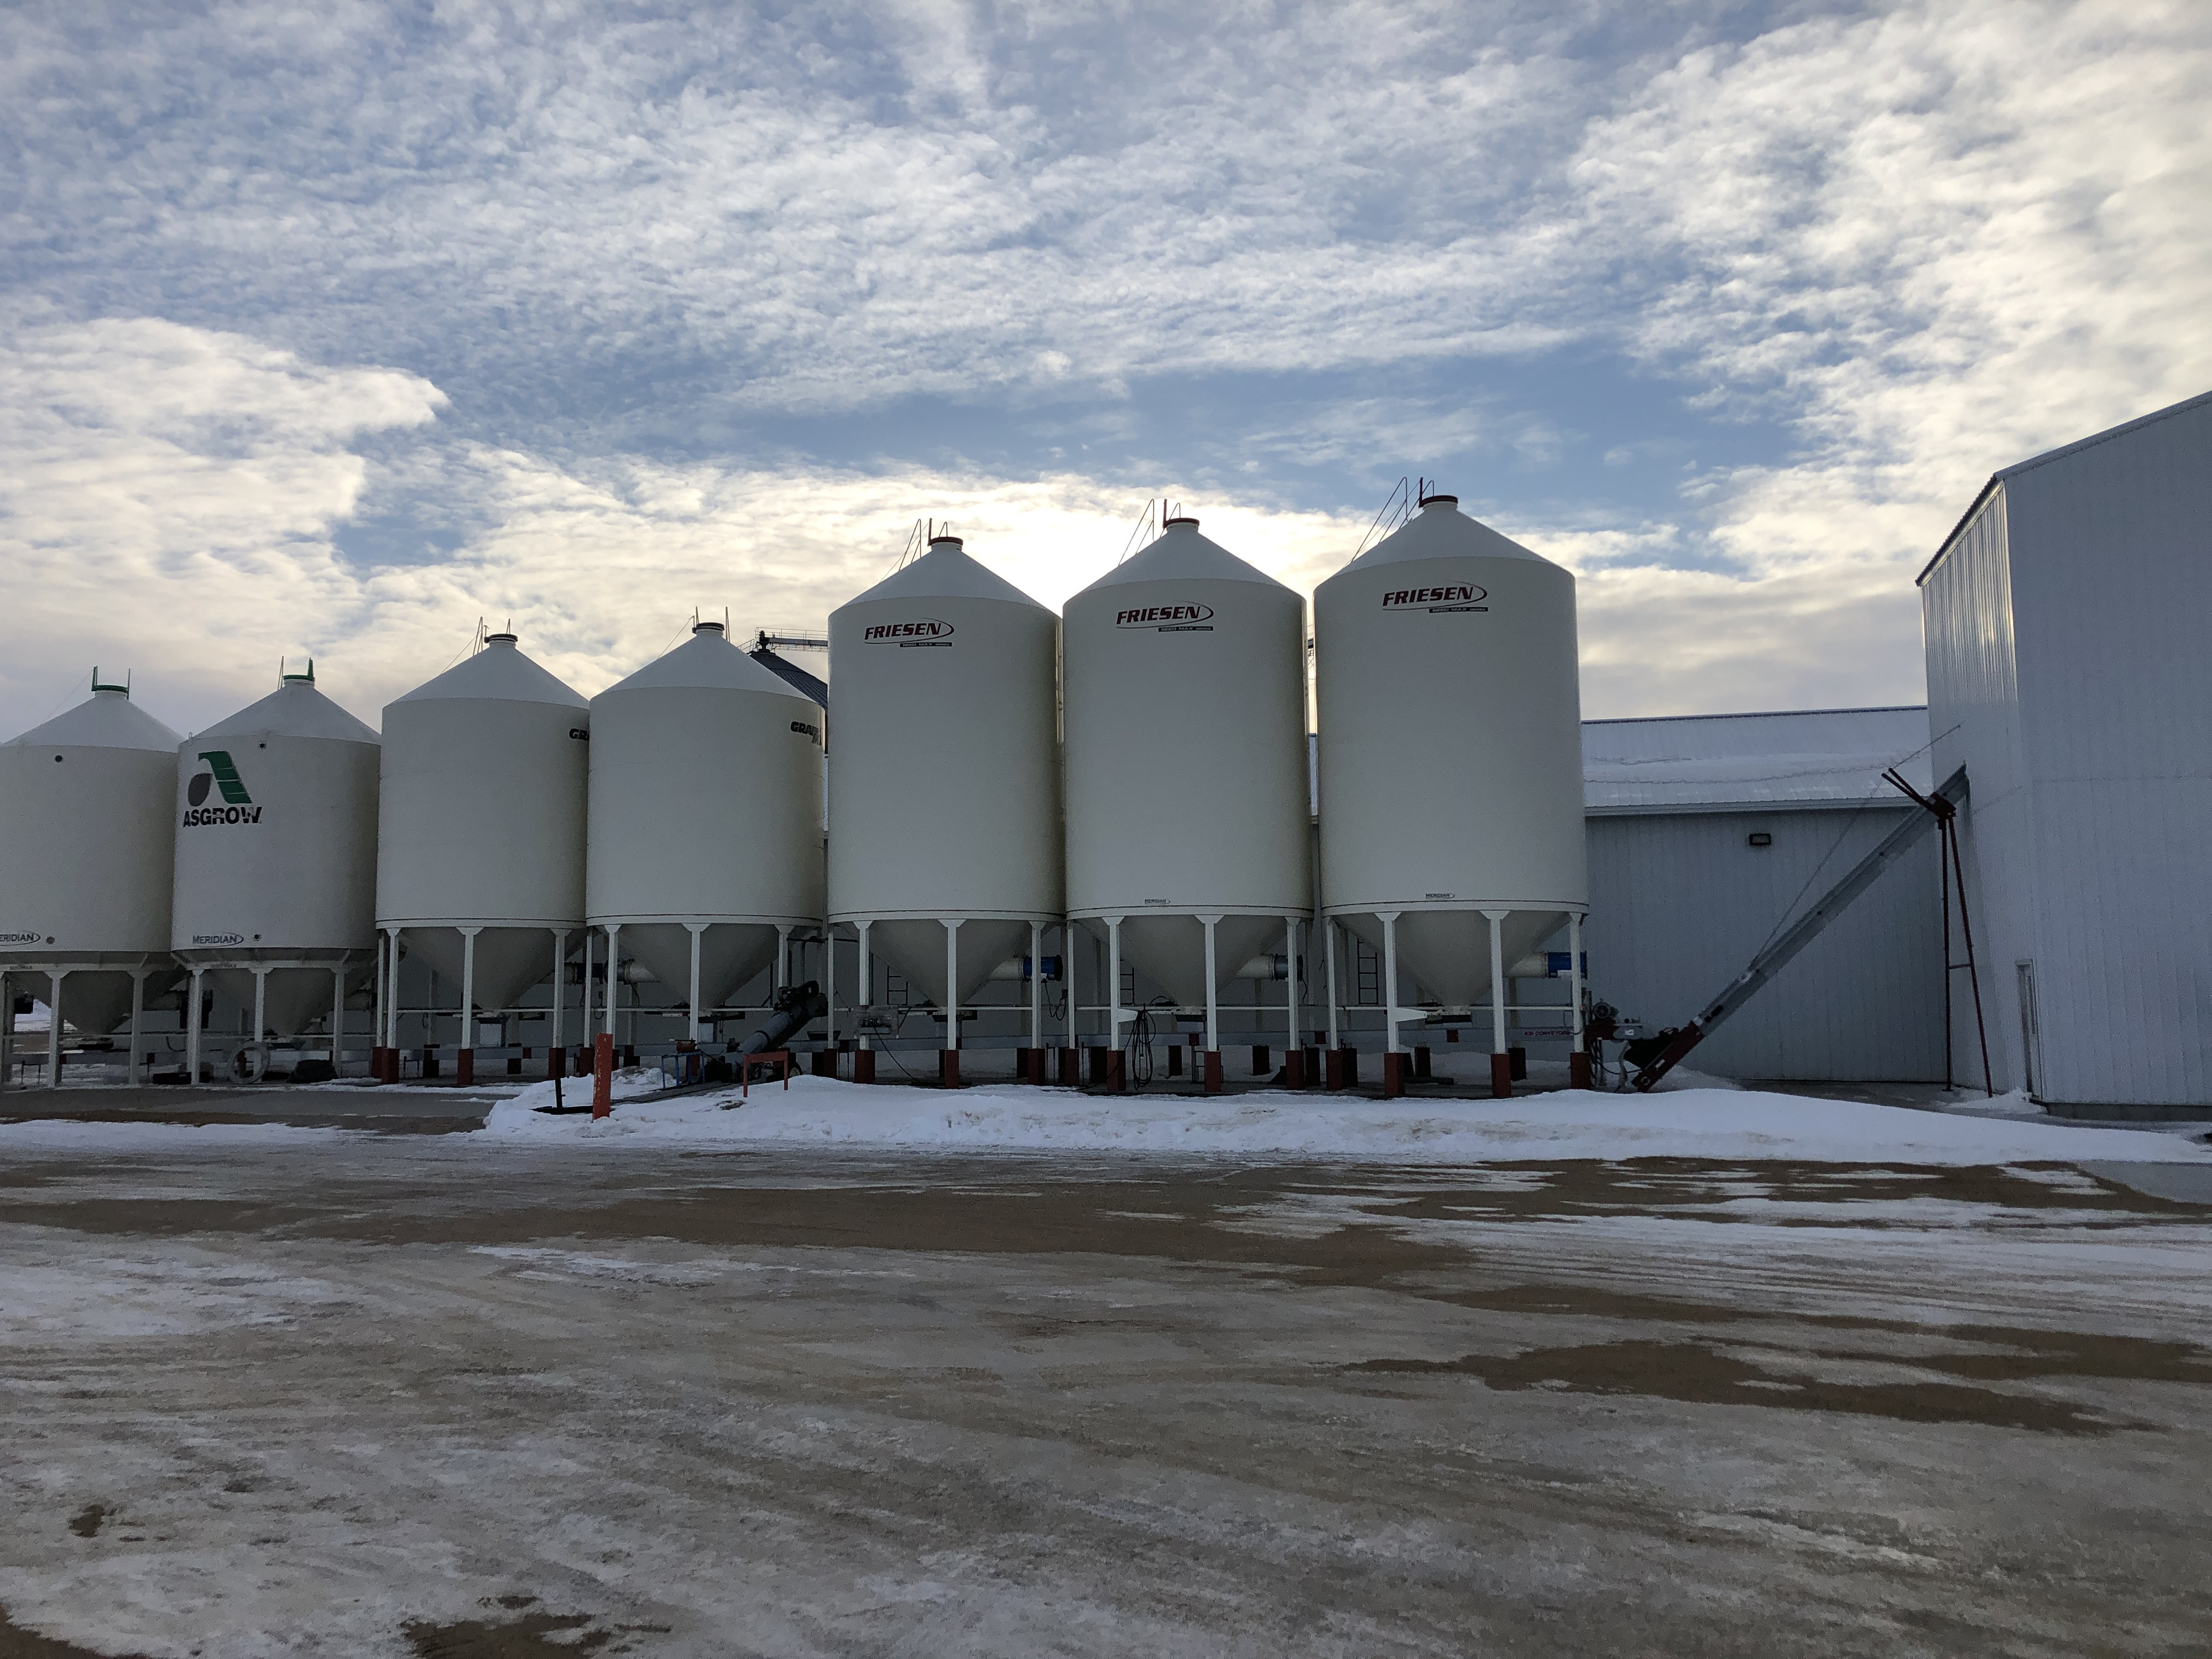 Afternoon Ag News 12.15.2020: USDA's Packers and Stockyards Act and more